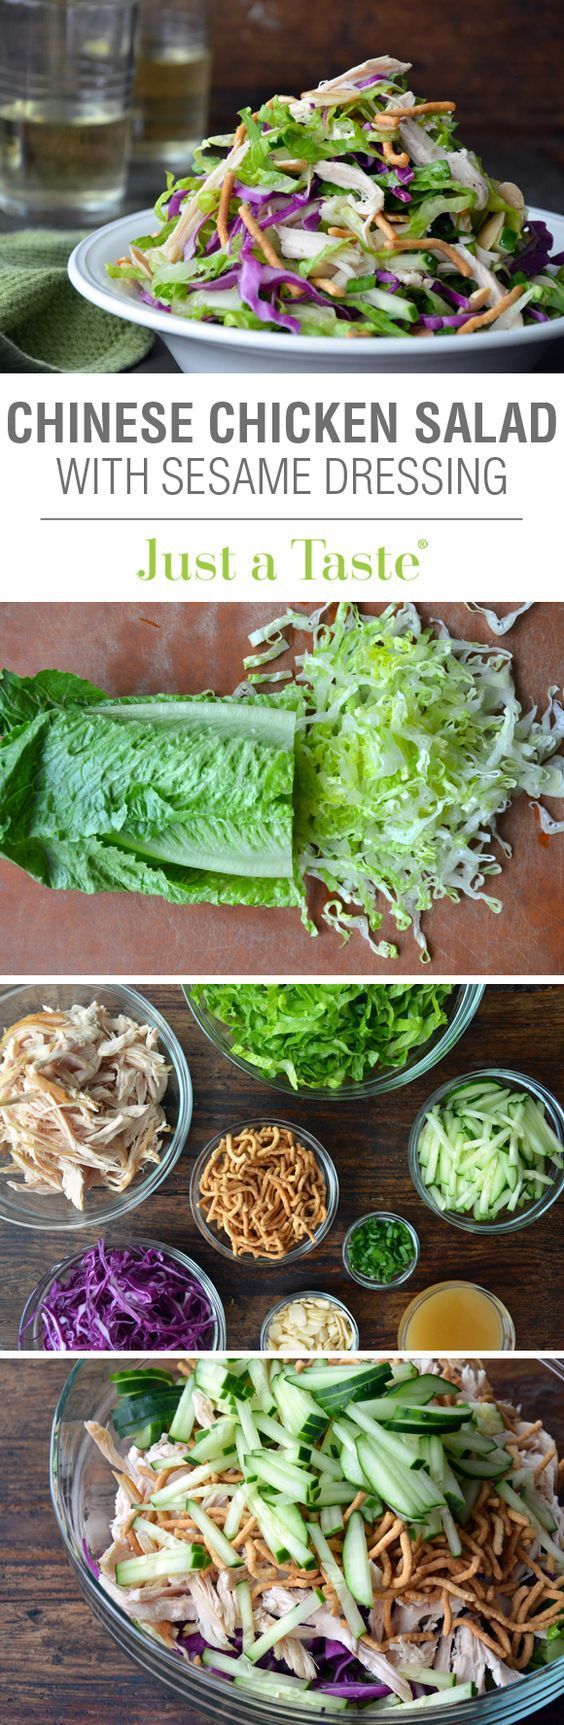 30 Most Pinned Salad Recipes on Pinterest